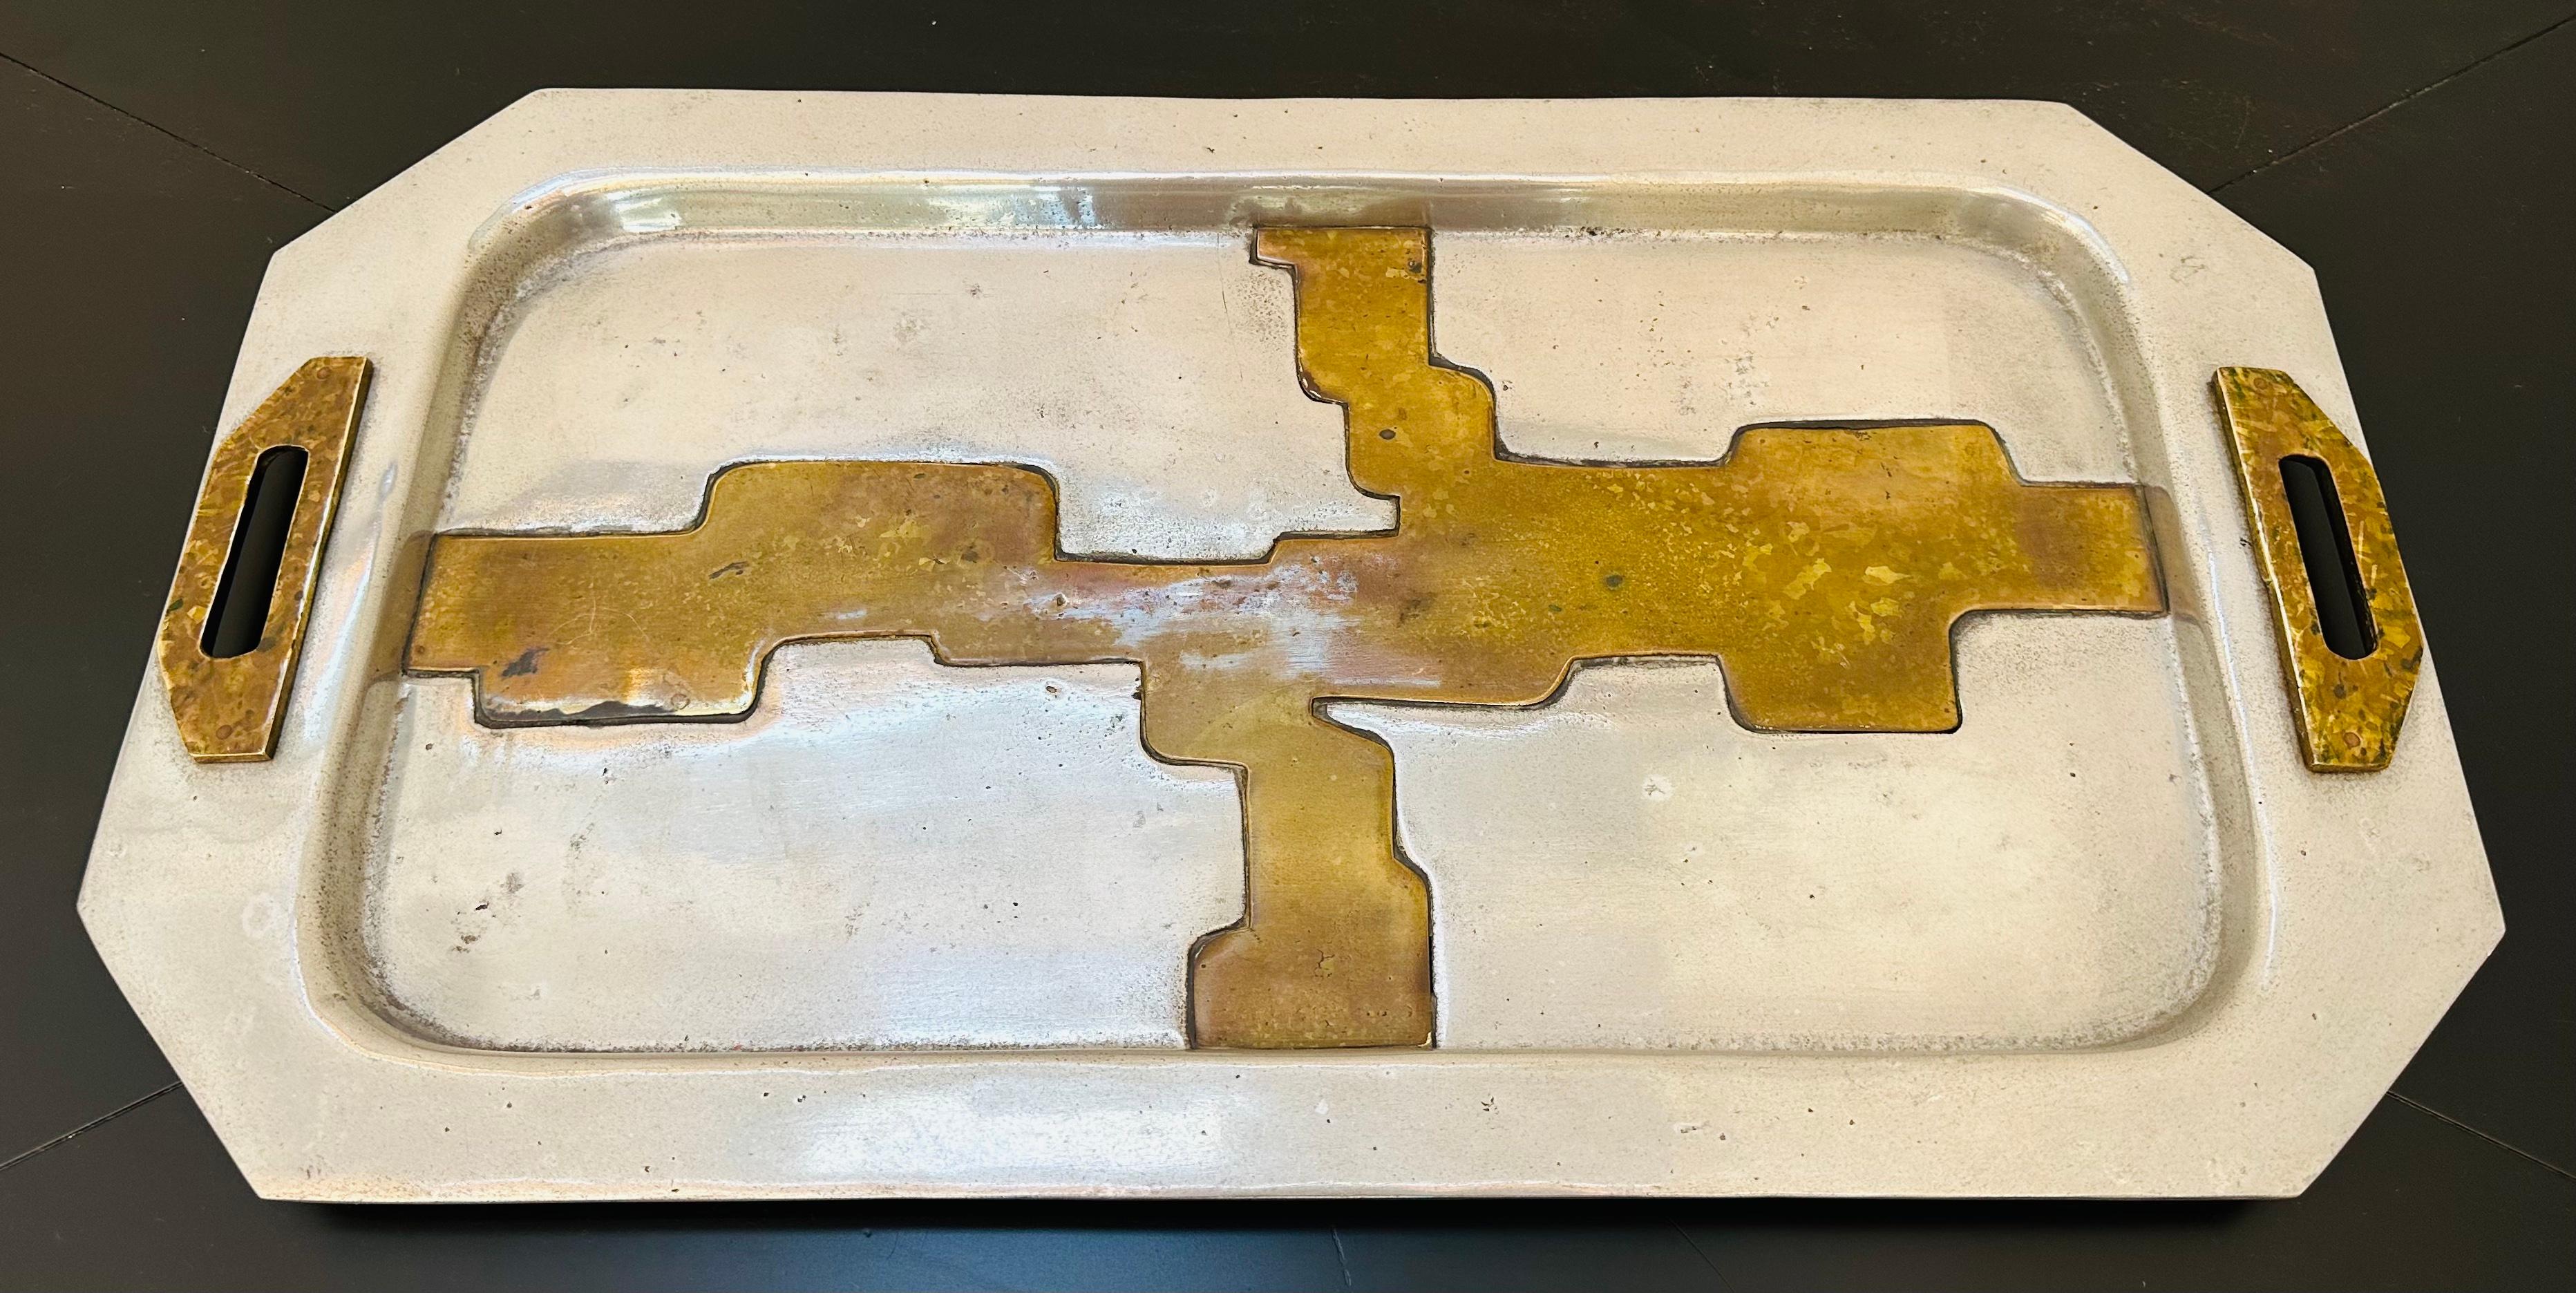 1970s Spanish aluminium & brass brutalist serving tray designed in the style of  Scottish artist David Marshall.  The brass is inlaid in an abstract design across the aluminium with matching raised brass handles.  The underneath of the tray has been